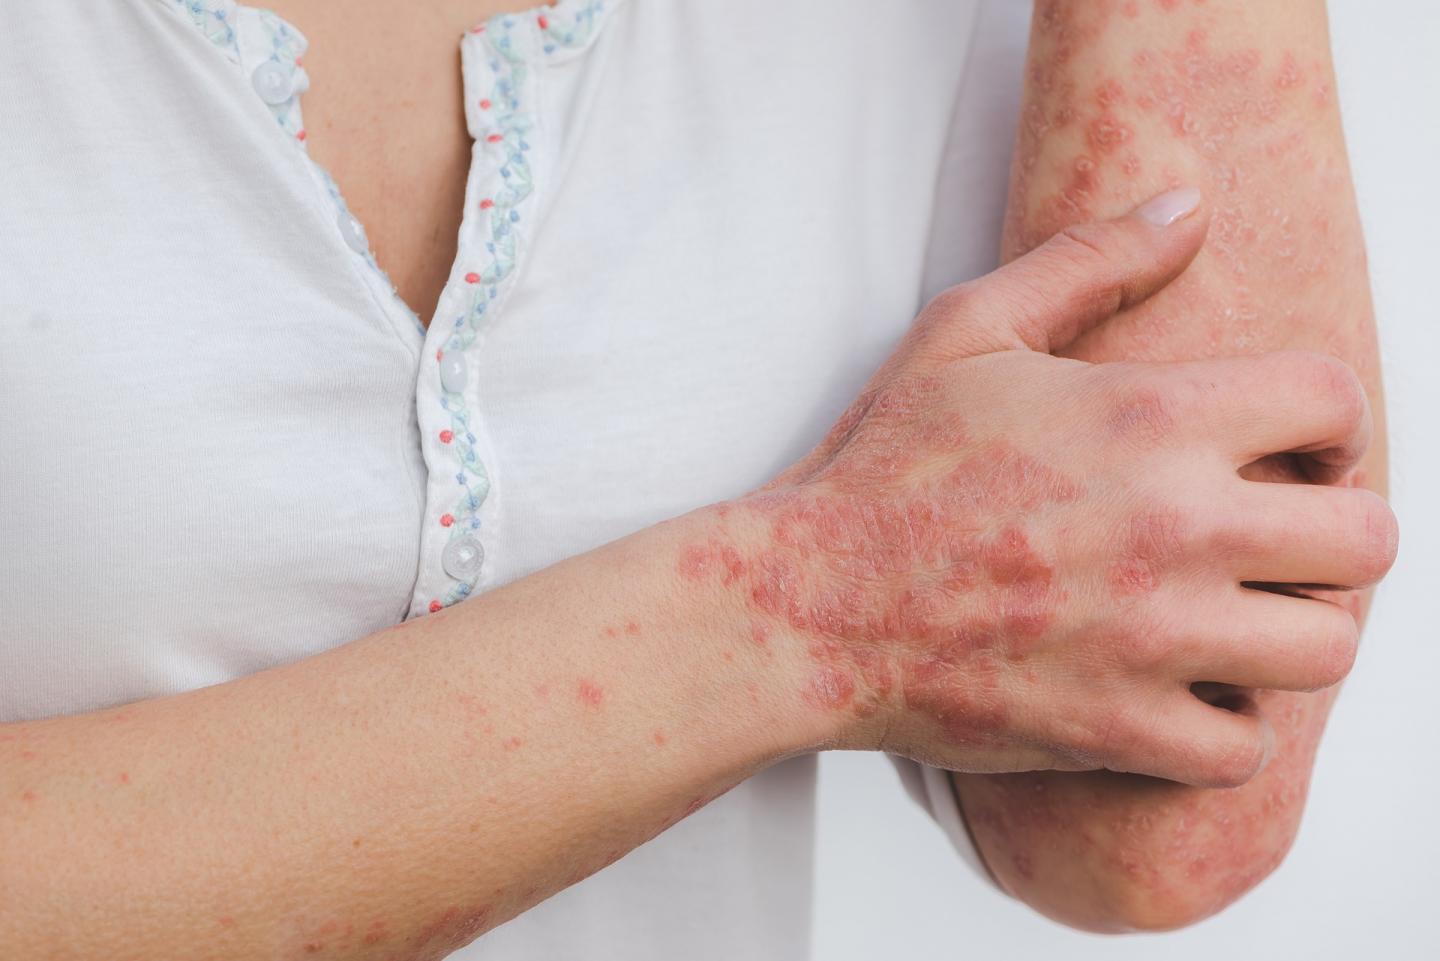 Relationship Between Psoriasis Treatments and Cardiovascular Risk Explained